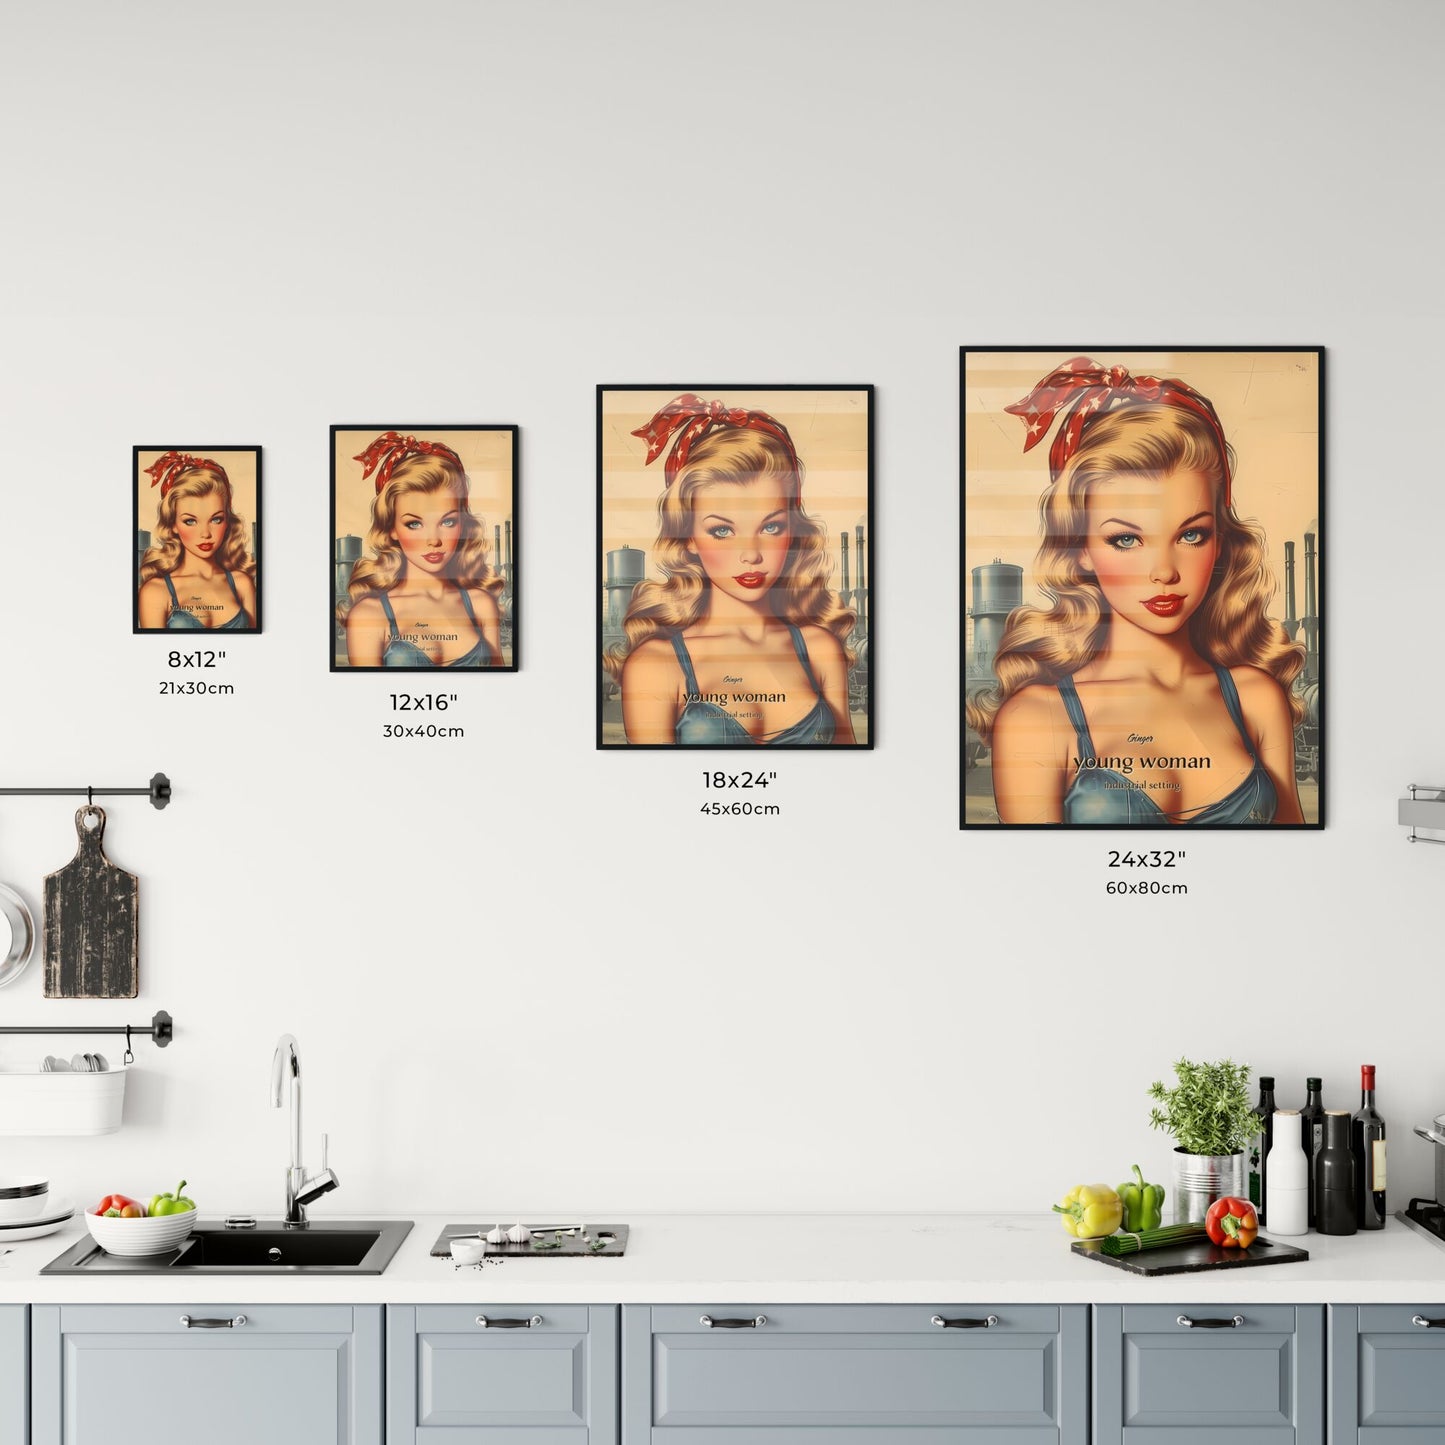 Ginger, young woman, industrial setting, A Poster of a woman with a red bow on her head Default Title